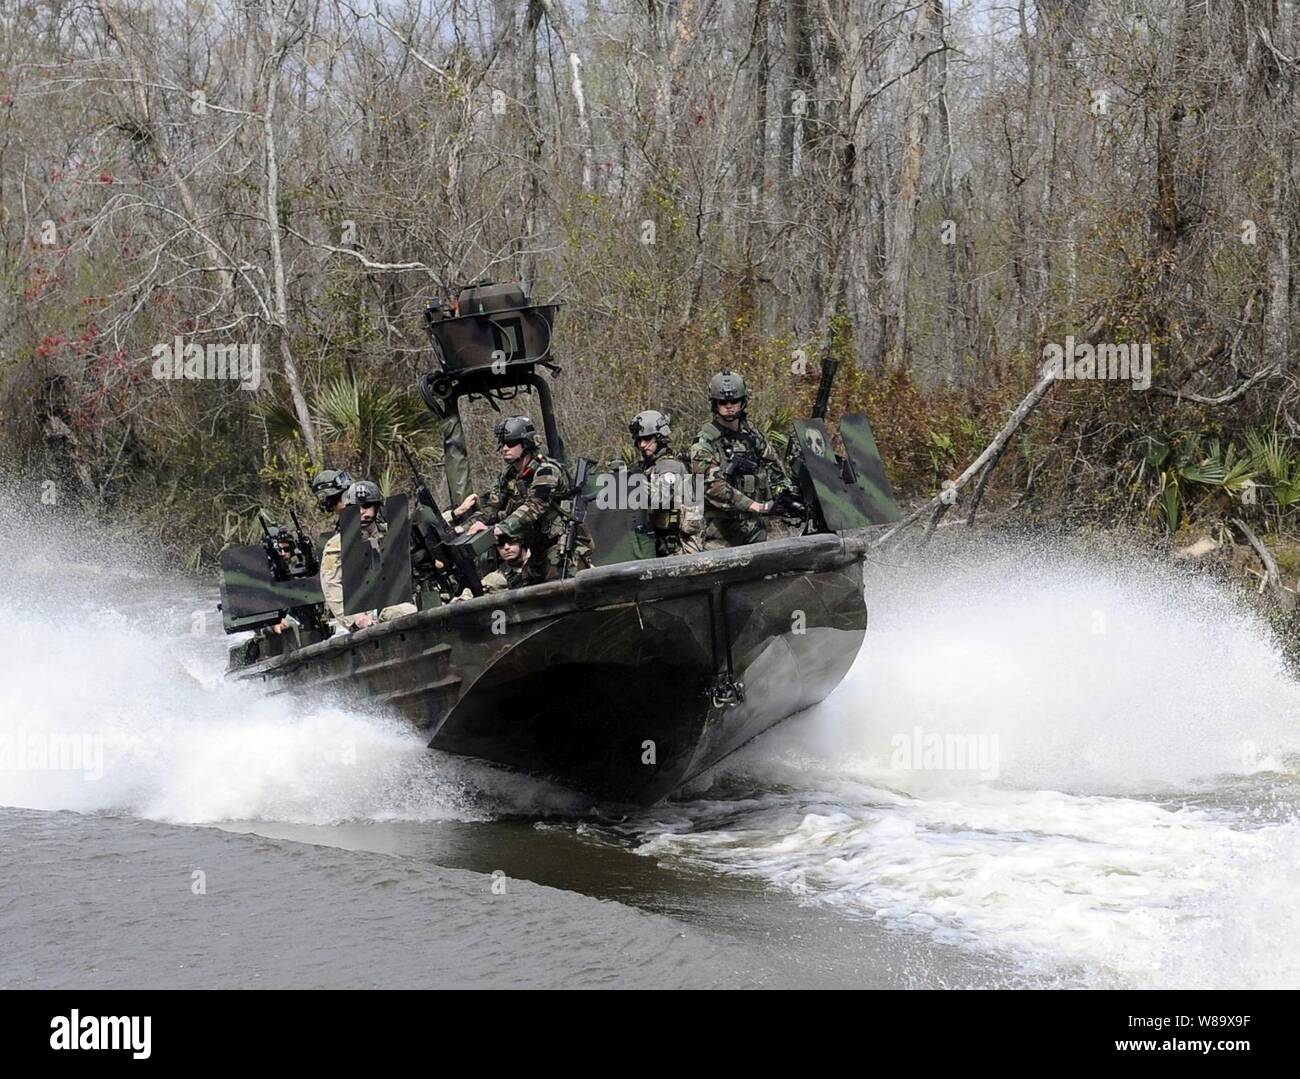 U.S. Navy Special Warfare Combatant-craft crewmen assigned to Special Boat Team 22 conduct live-fire drills on the riverine training range at the John C. Stennis Space Center in Mississippi on March 4, 2009.  Sailors assigned to Special Boat Team 22 operate special operations riverine craft and are assigned to Naval Special Warfare Group 4, the only U.S. special operations command dedicated to operating in riverine environments. Stock Photo